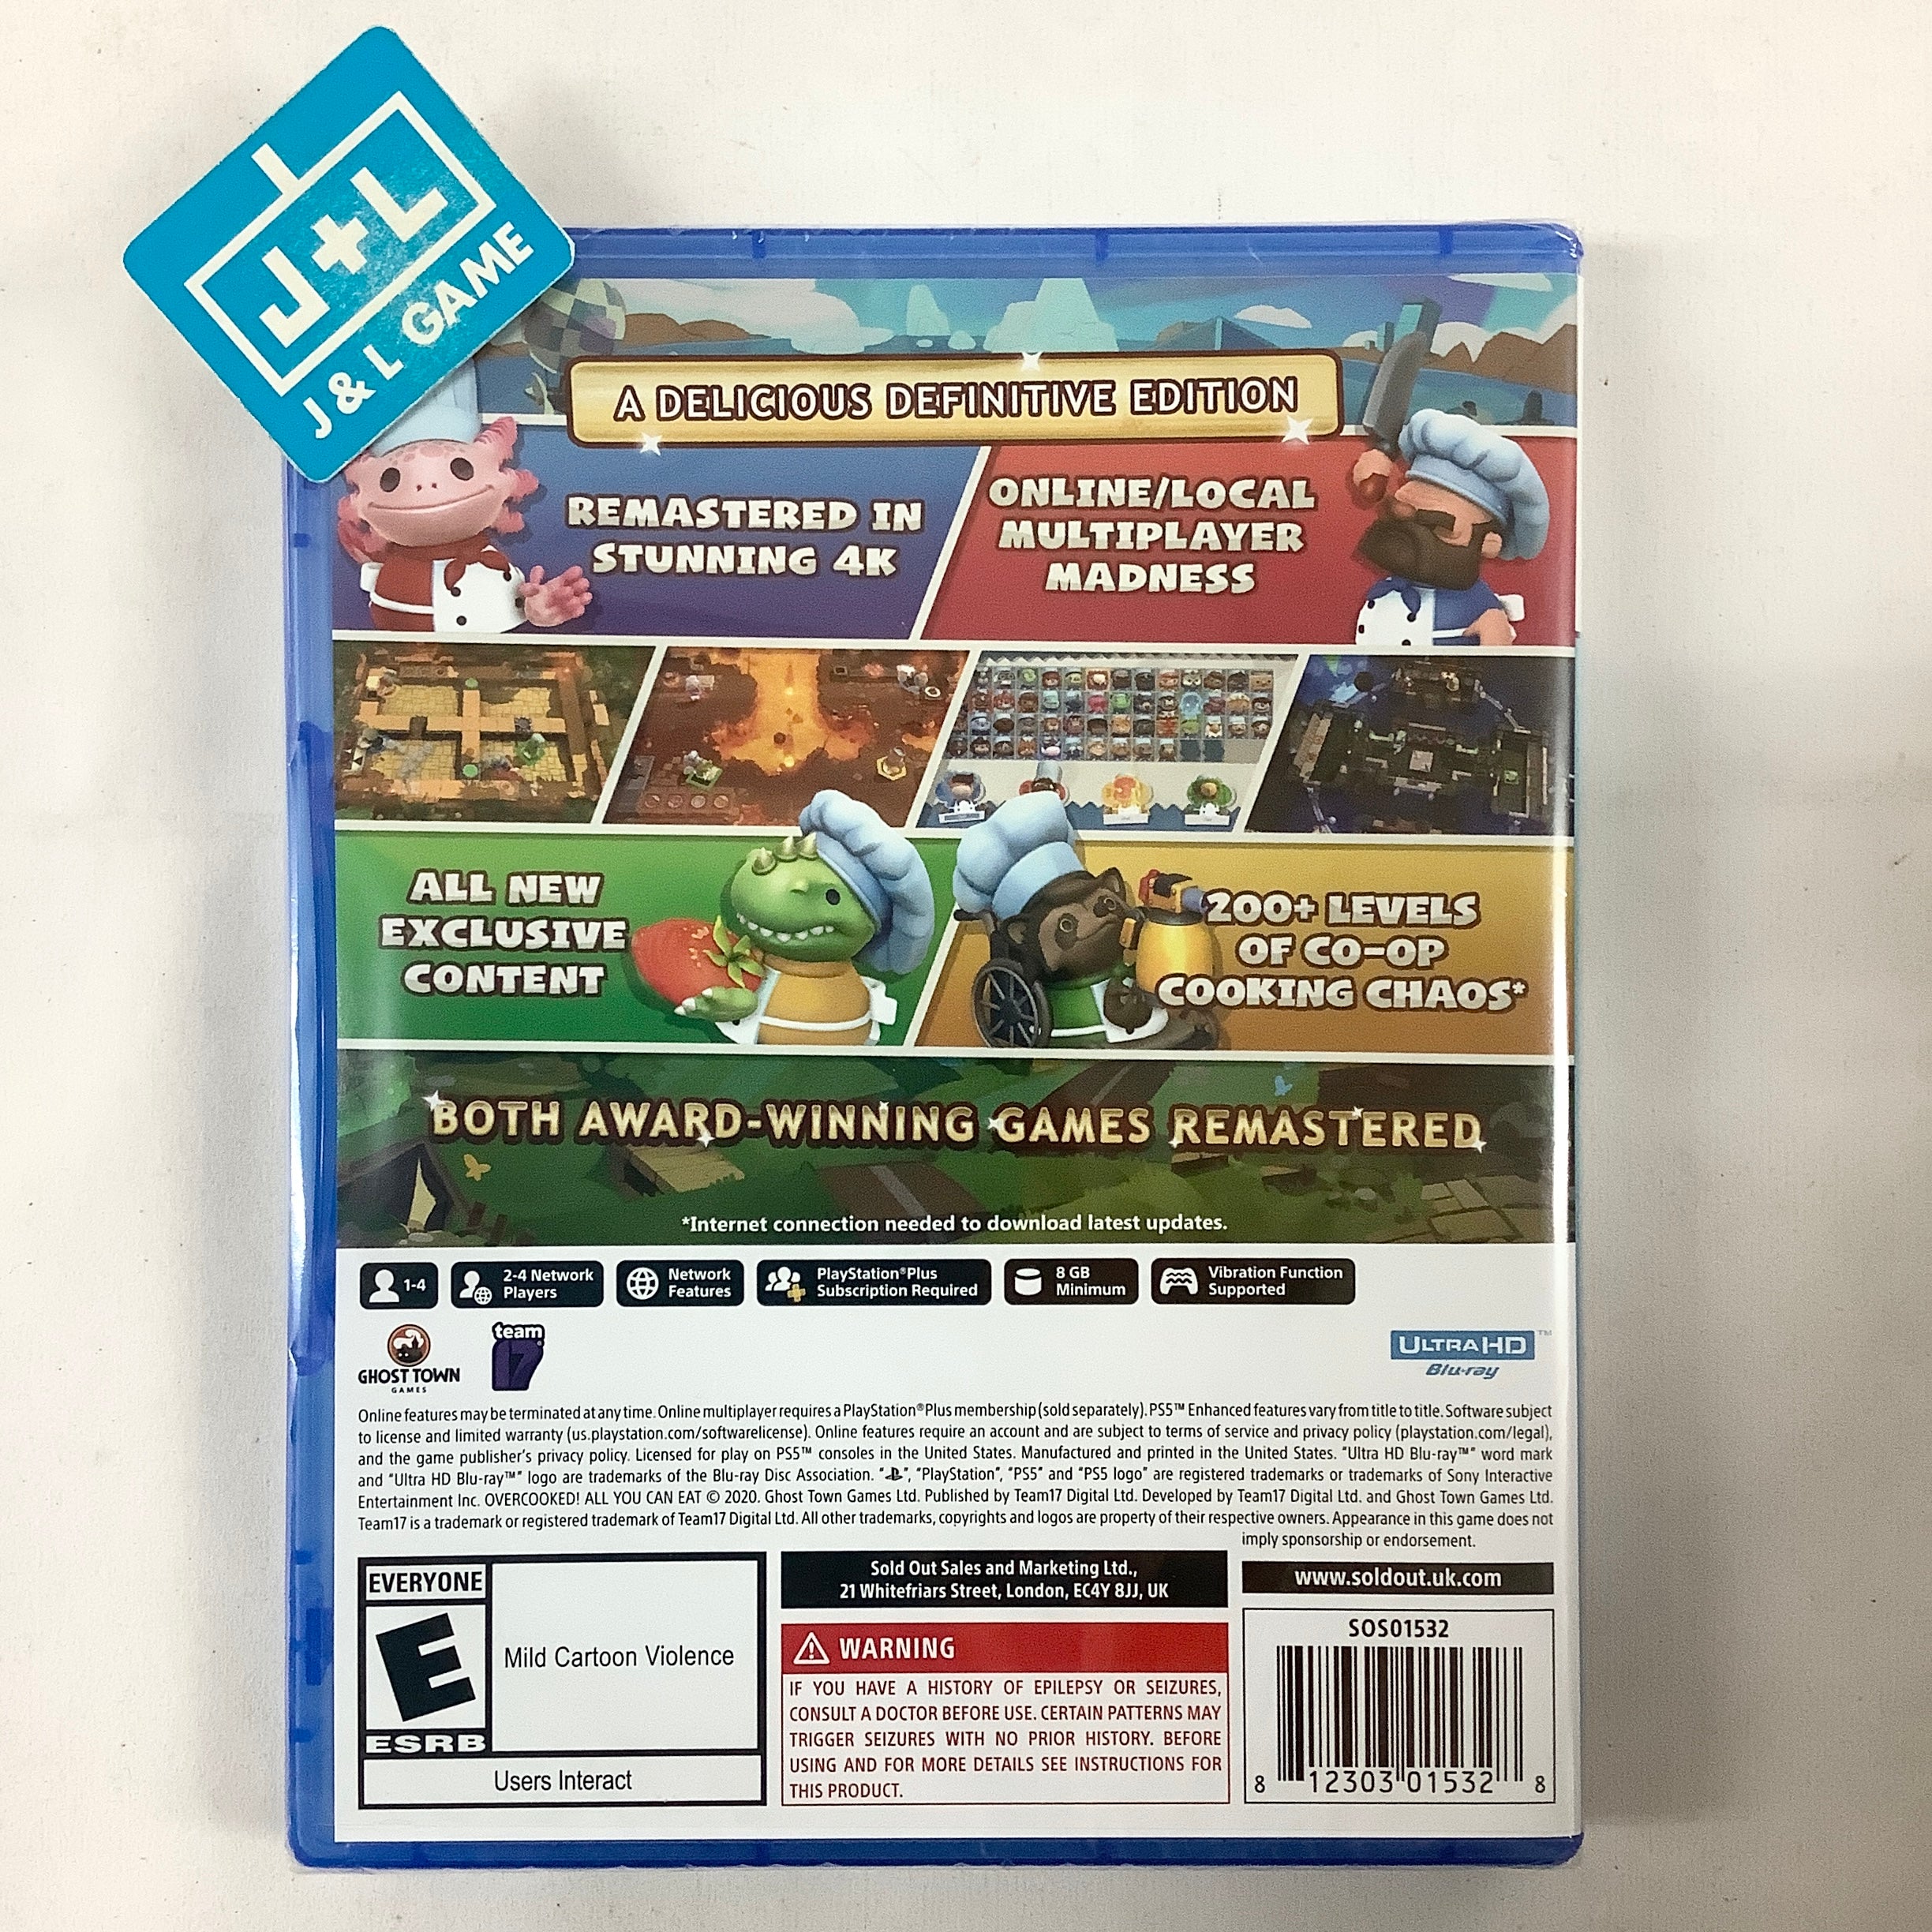 Overcooked! All You Can Eat - (PS5) PlayStation 5 Video Games Sold Out   